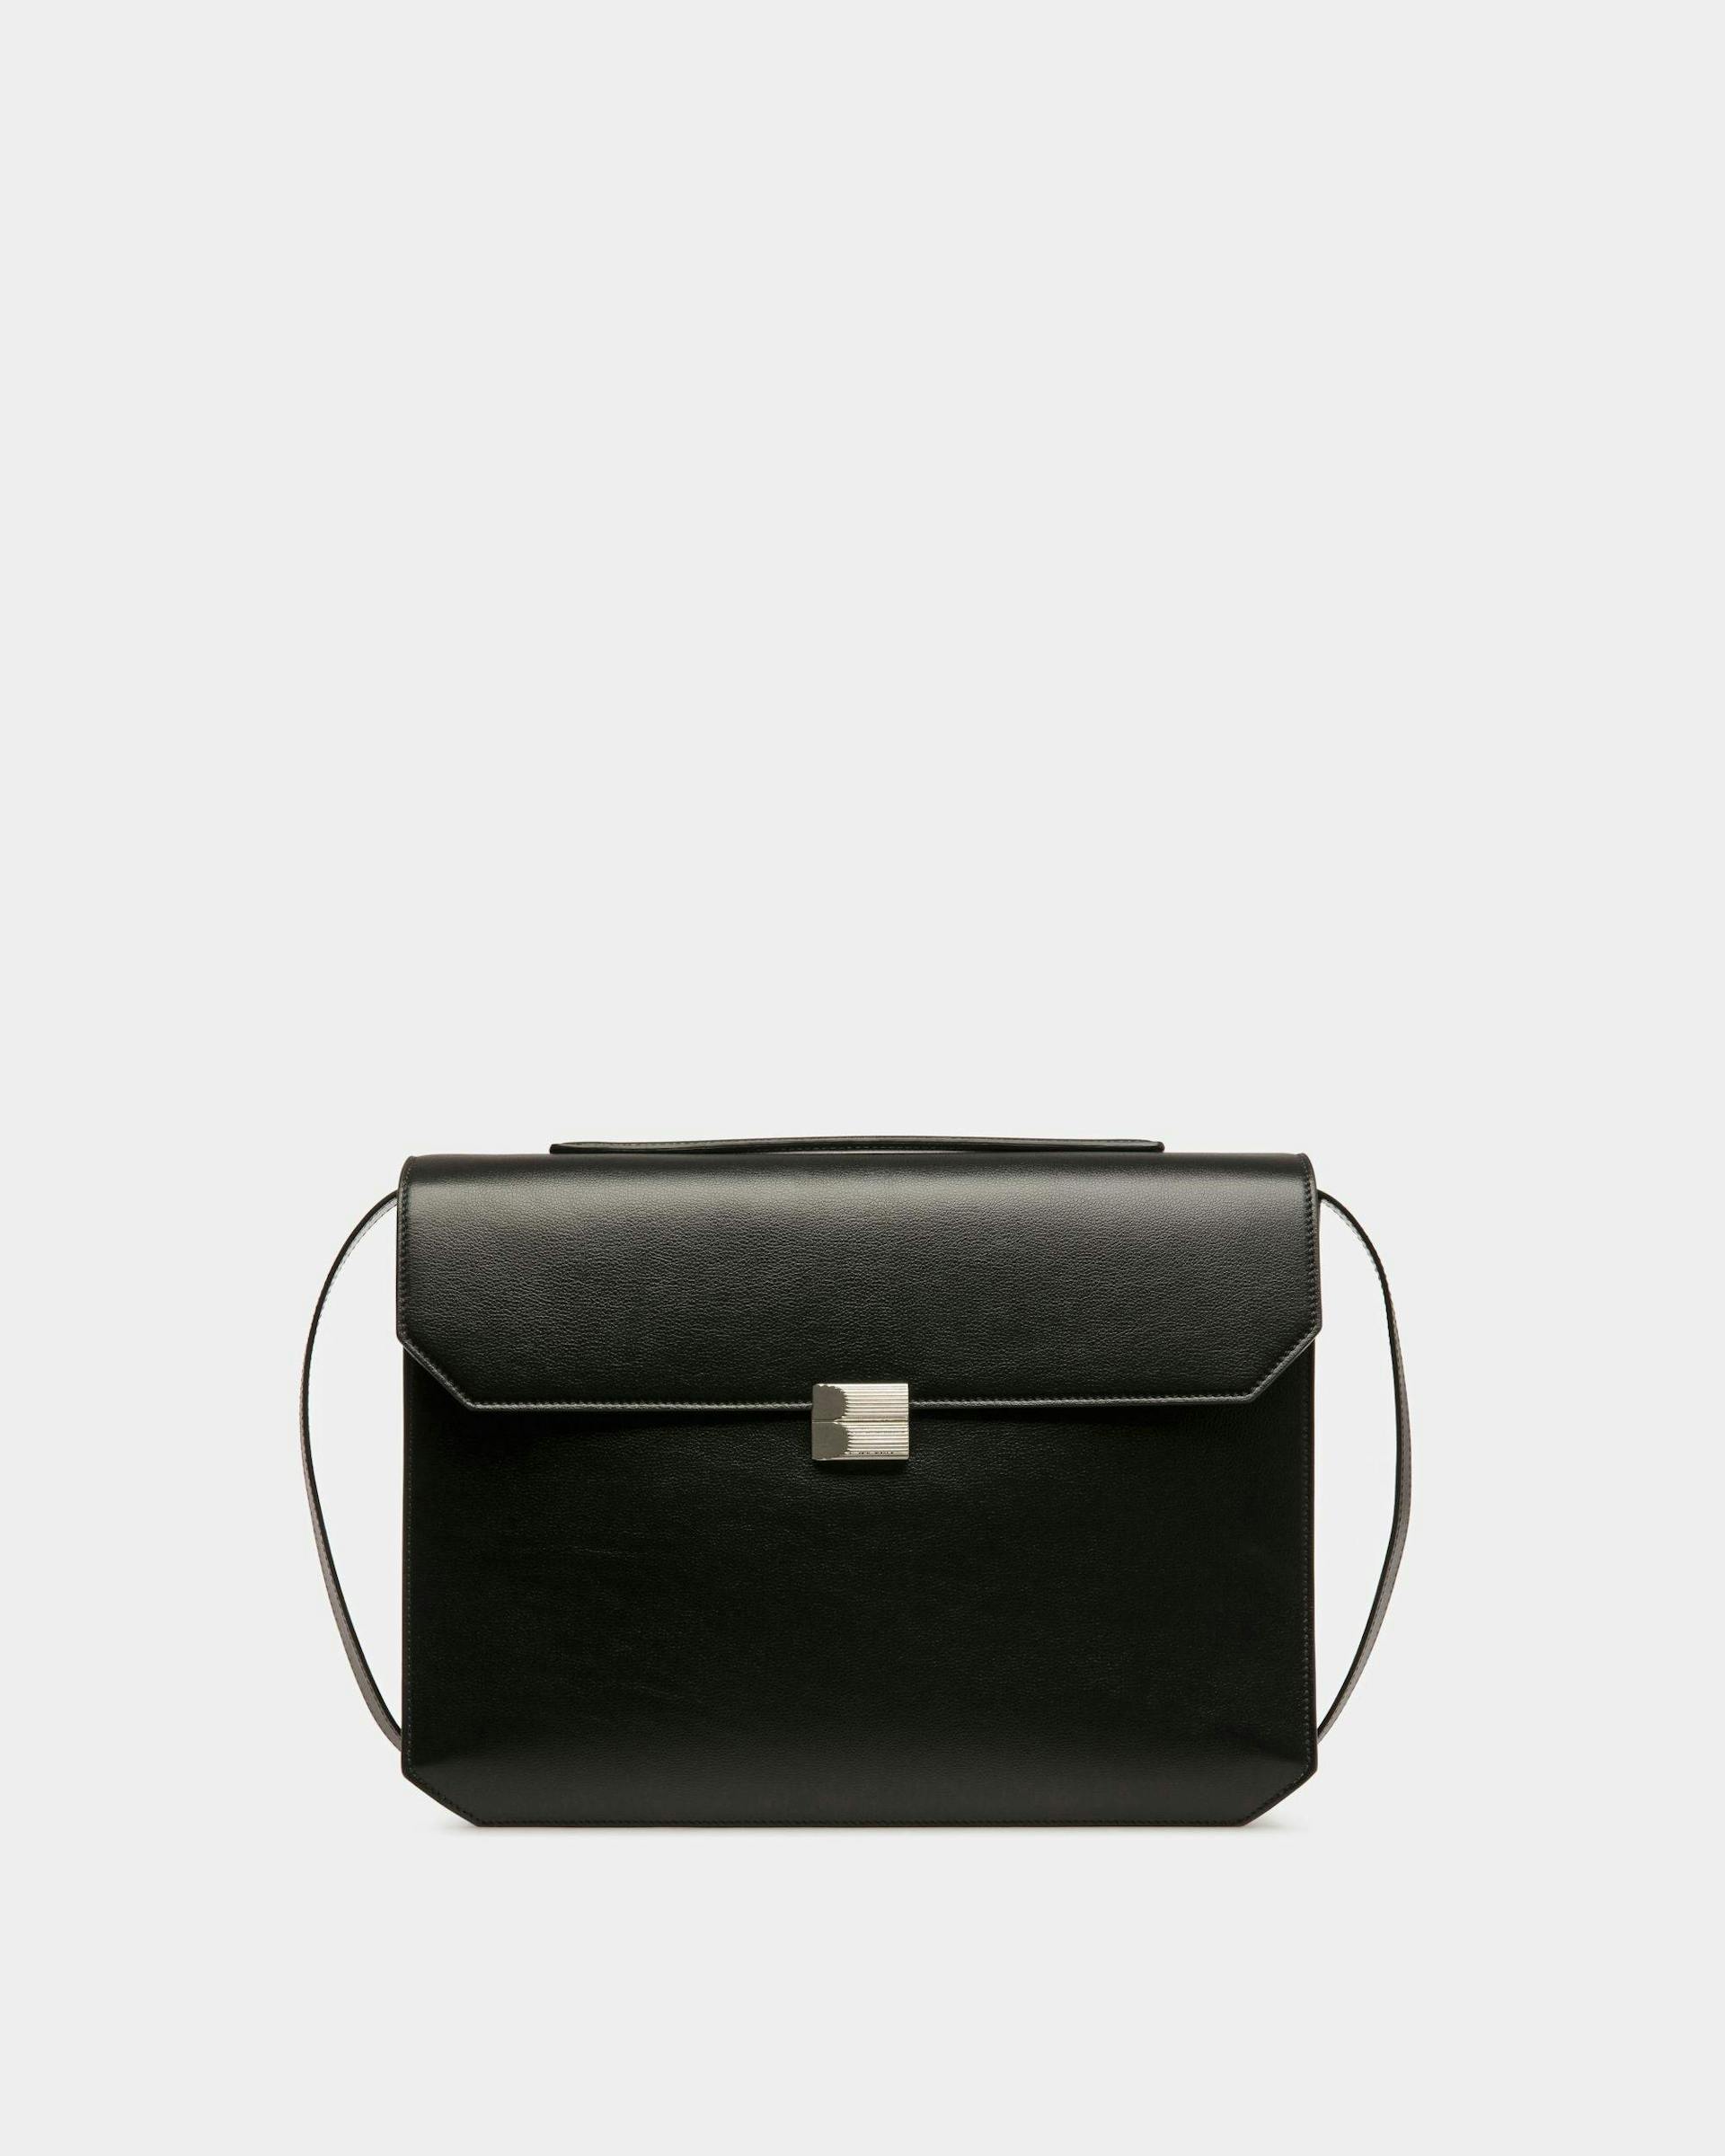 Men's Banque Business Bag In Black Leather | Bally | Still Life Front